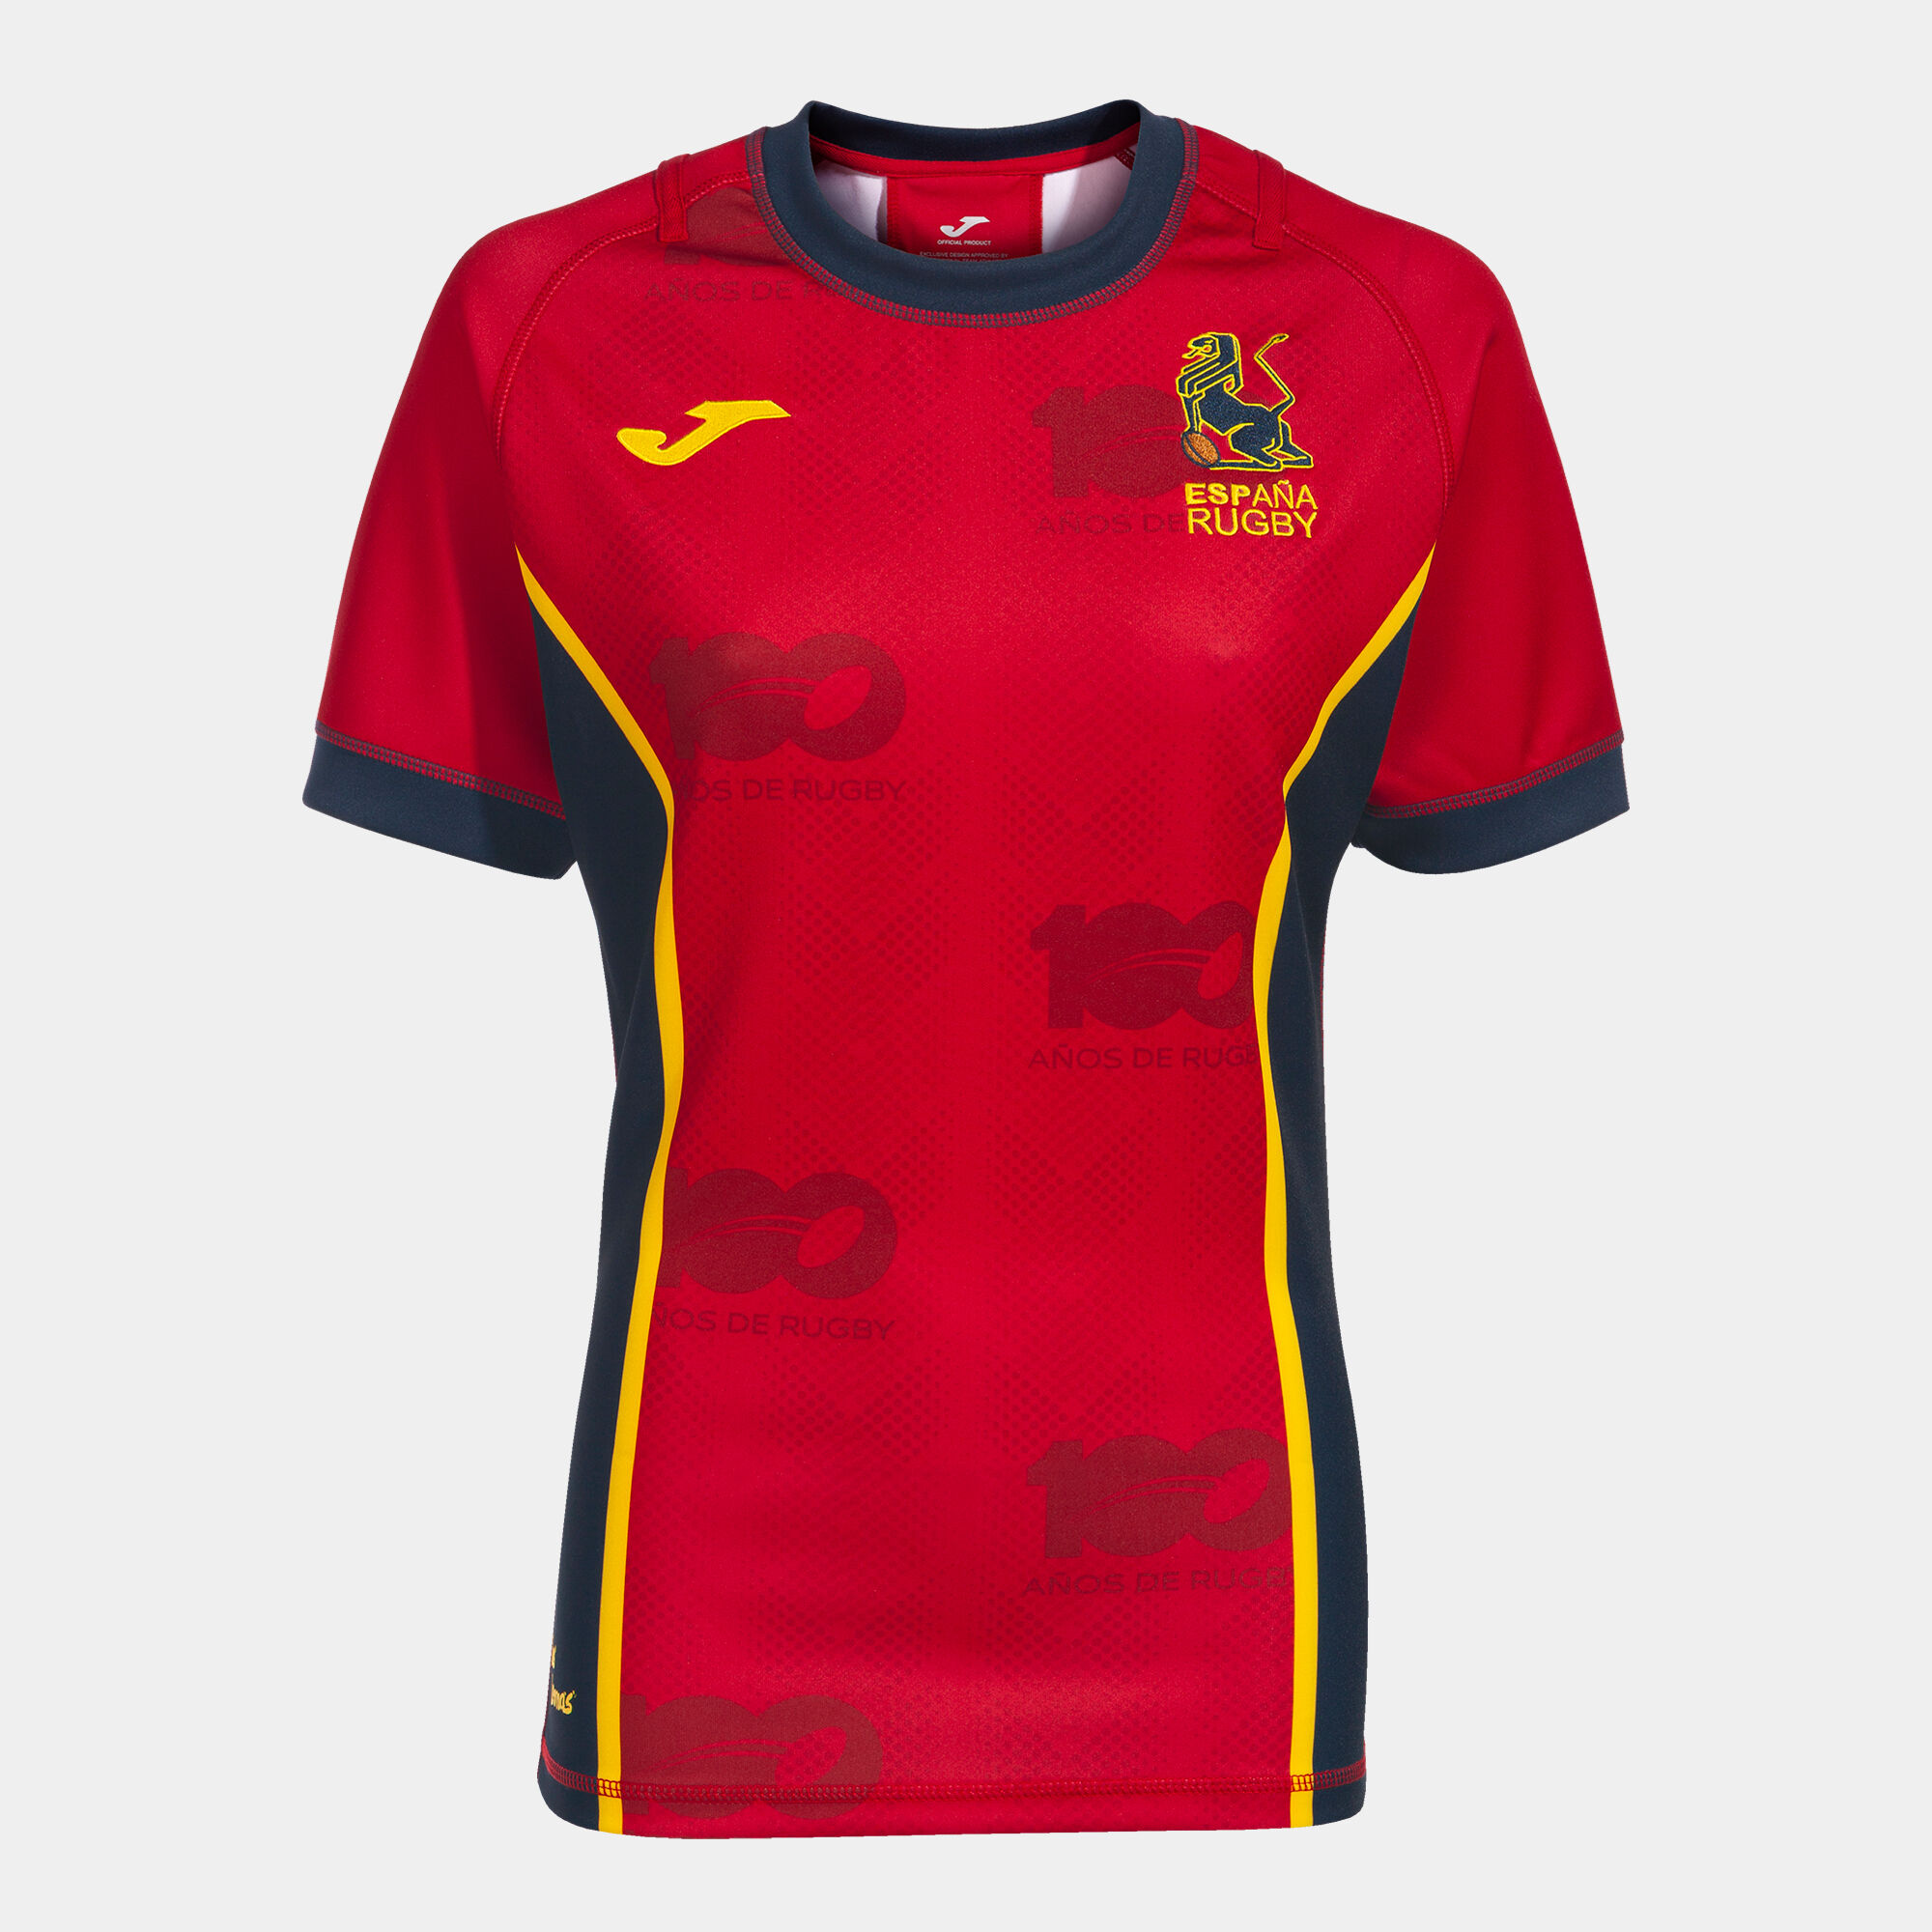 Shirt short sleeve home kit Spanish Rugby Federation woman